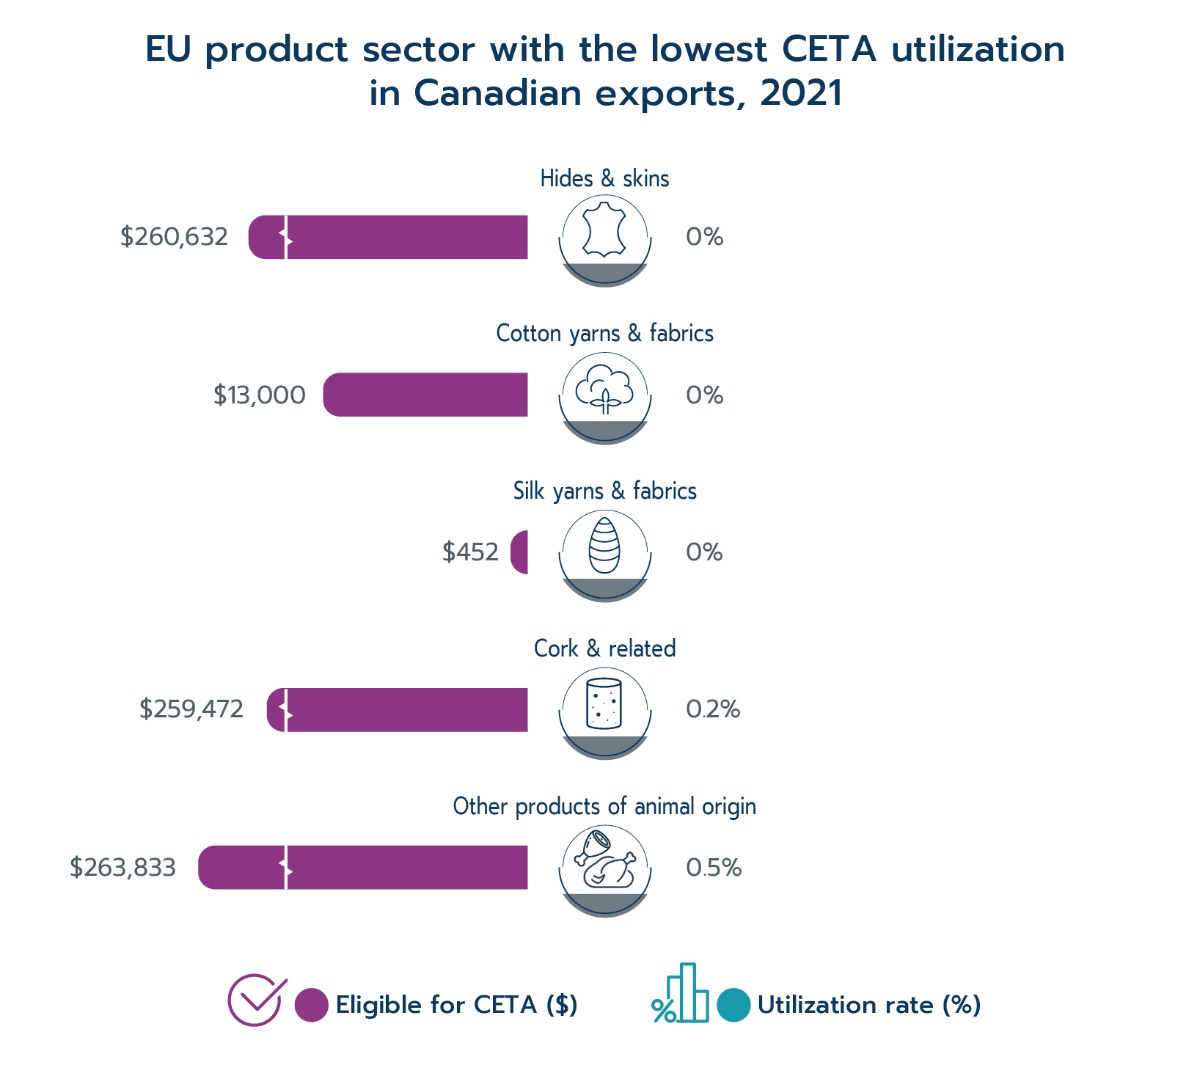 EU product sectors with the lowest CETA utilization in Canadian exports, 2021